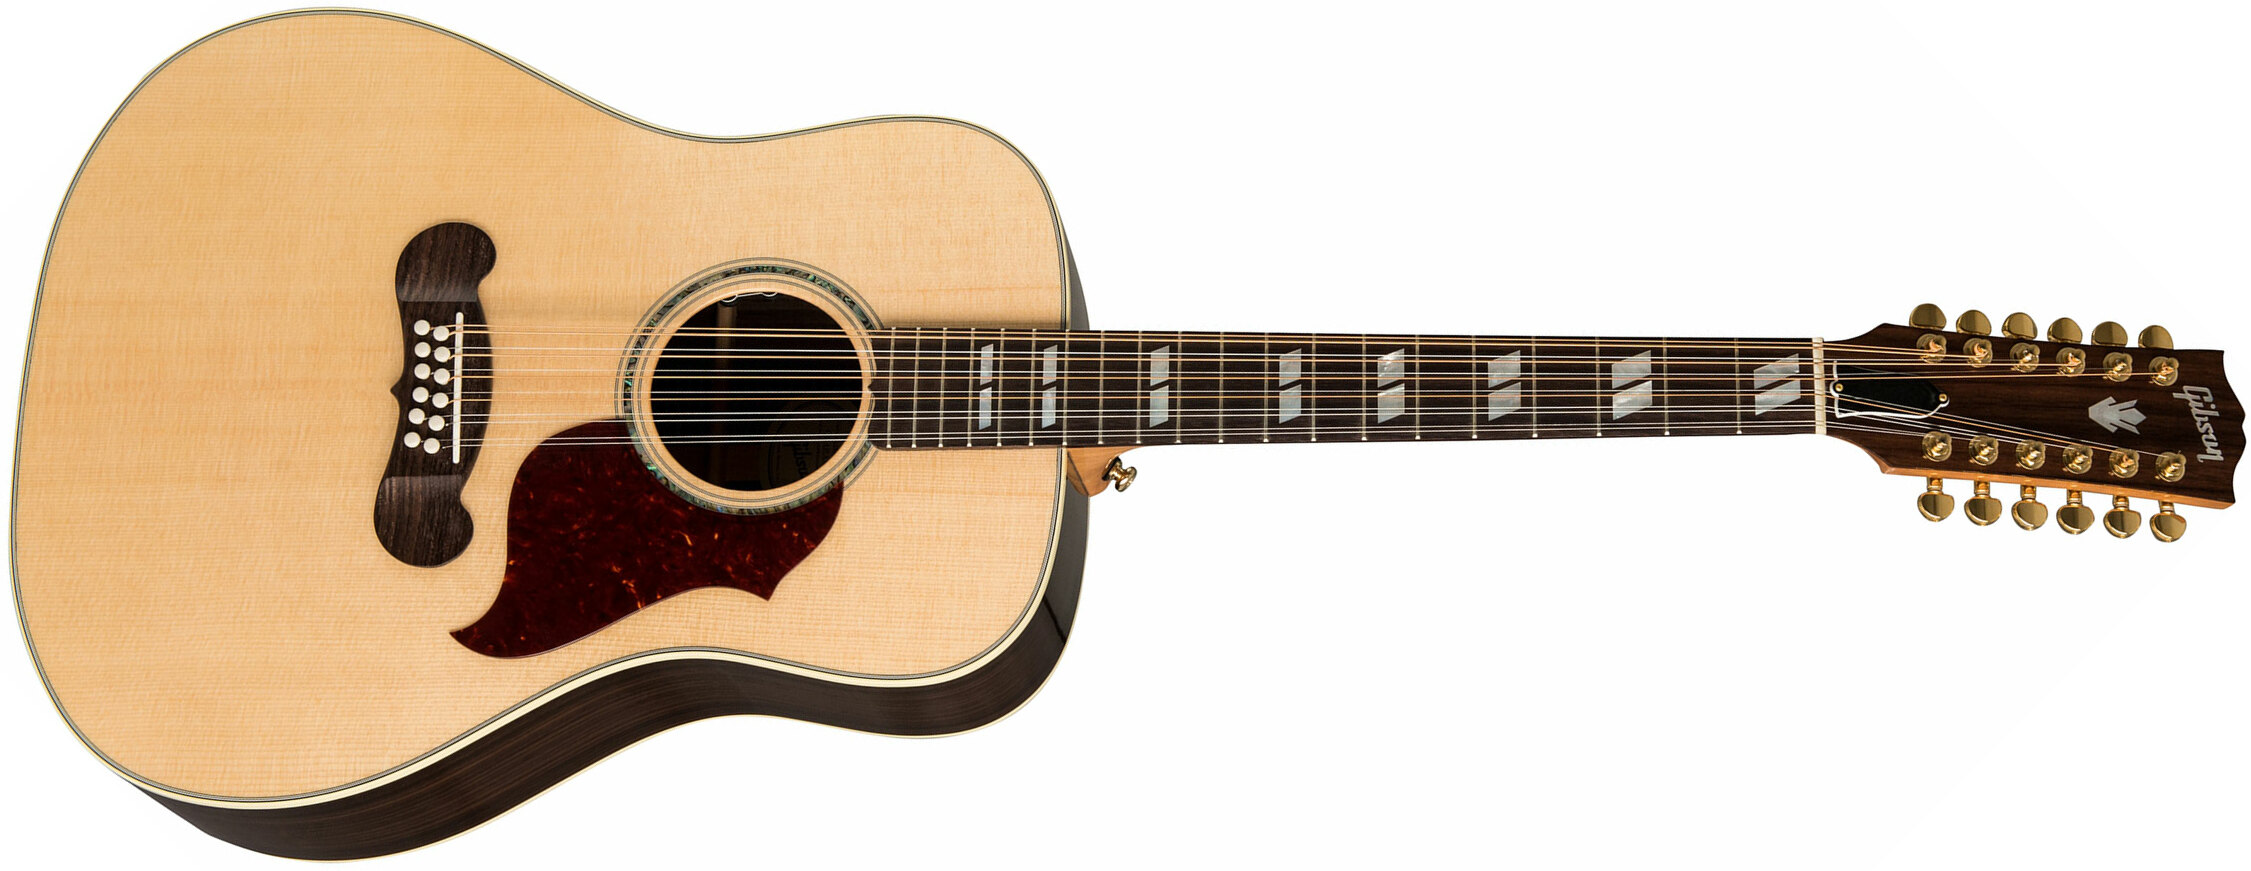 Gibson Songwriter 12-string 2019 Dreadnought 12-cordes Epicea Palissandre Rw - Antique Natural - Acoustic guitar & electro - Main picture